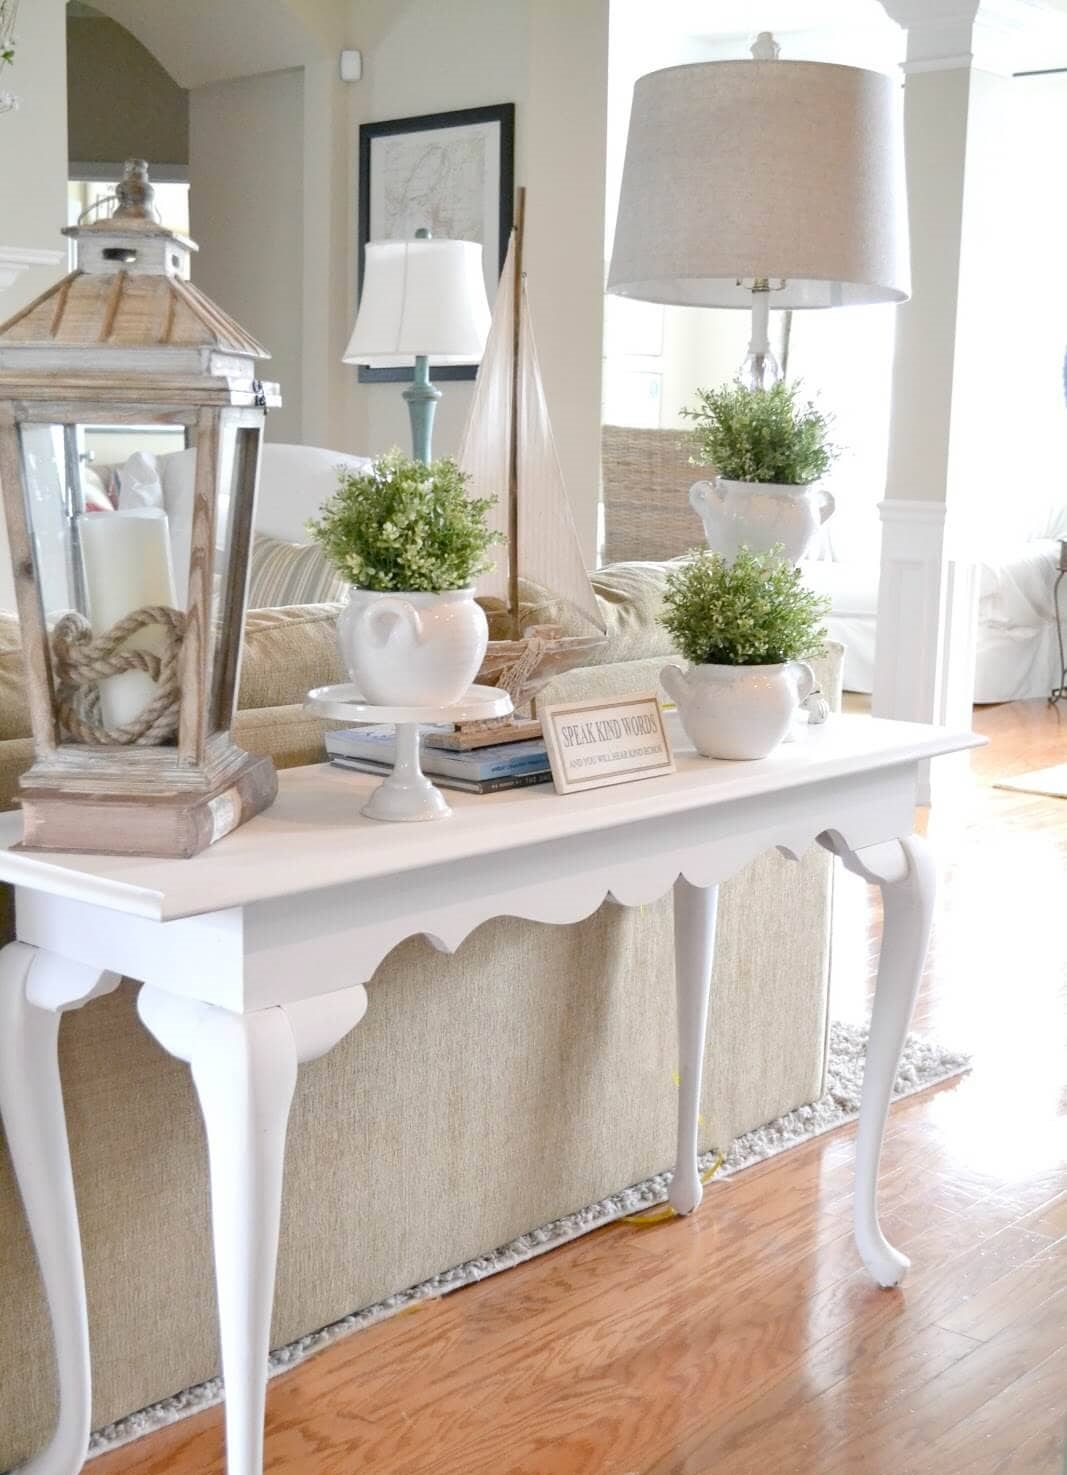 Impressive coffee table ideas to add style to your home - 85